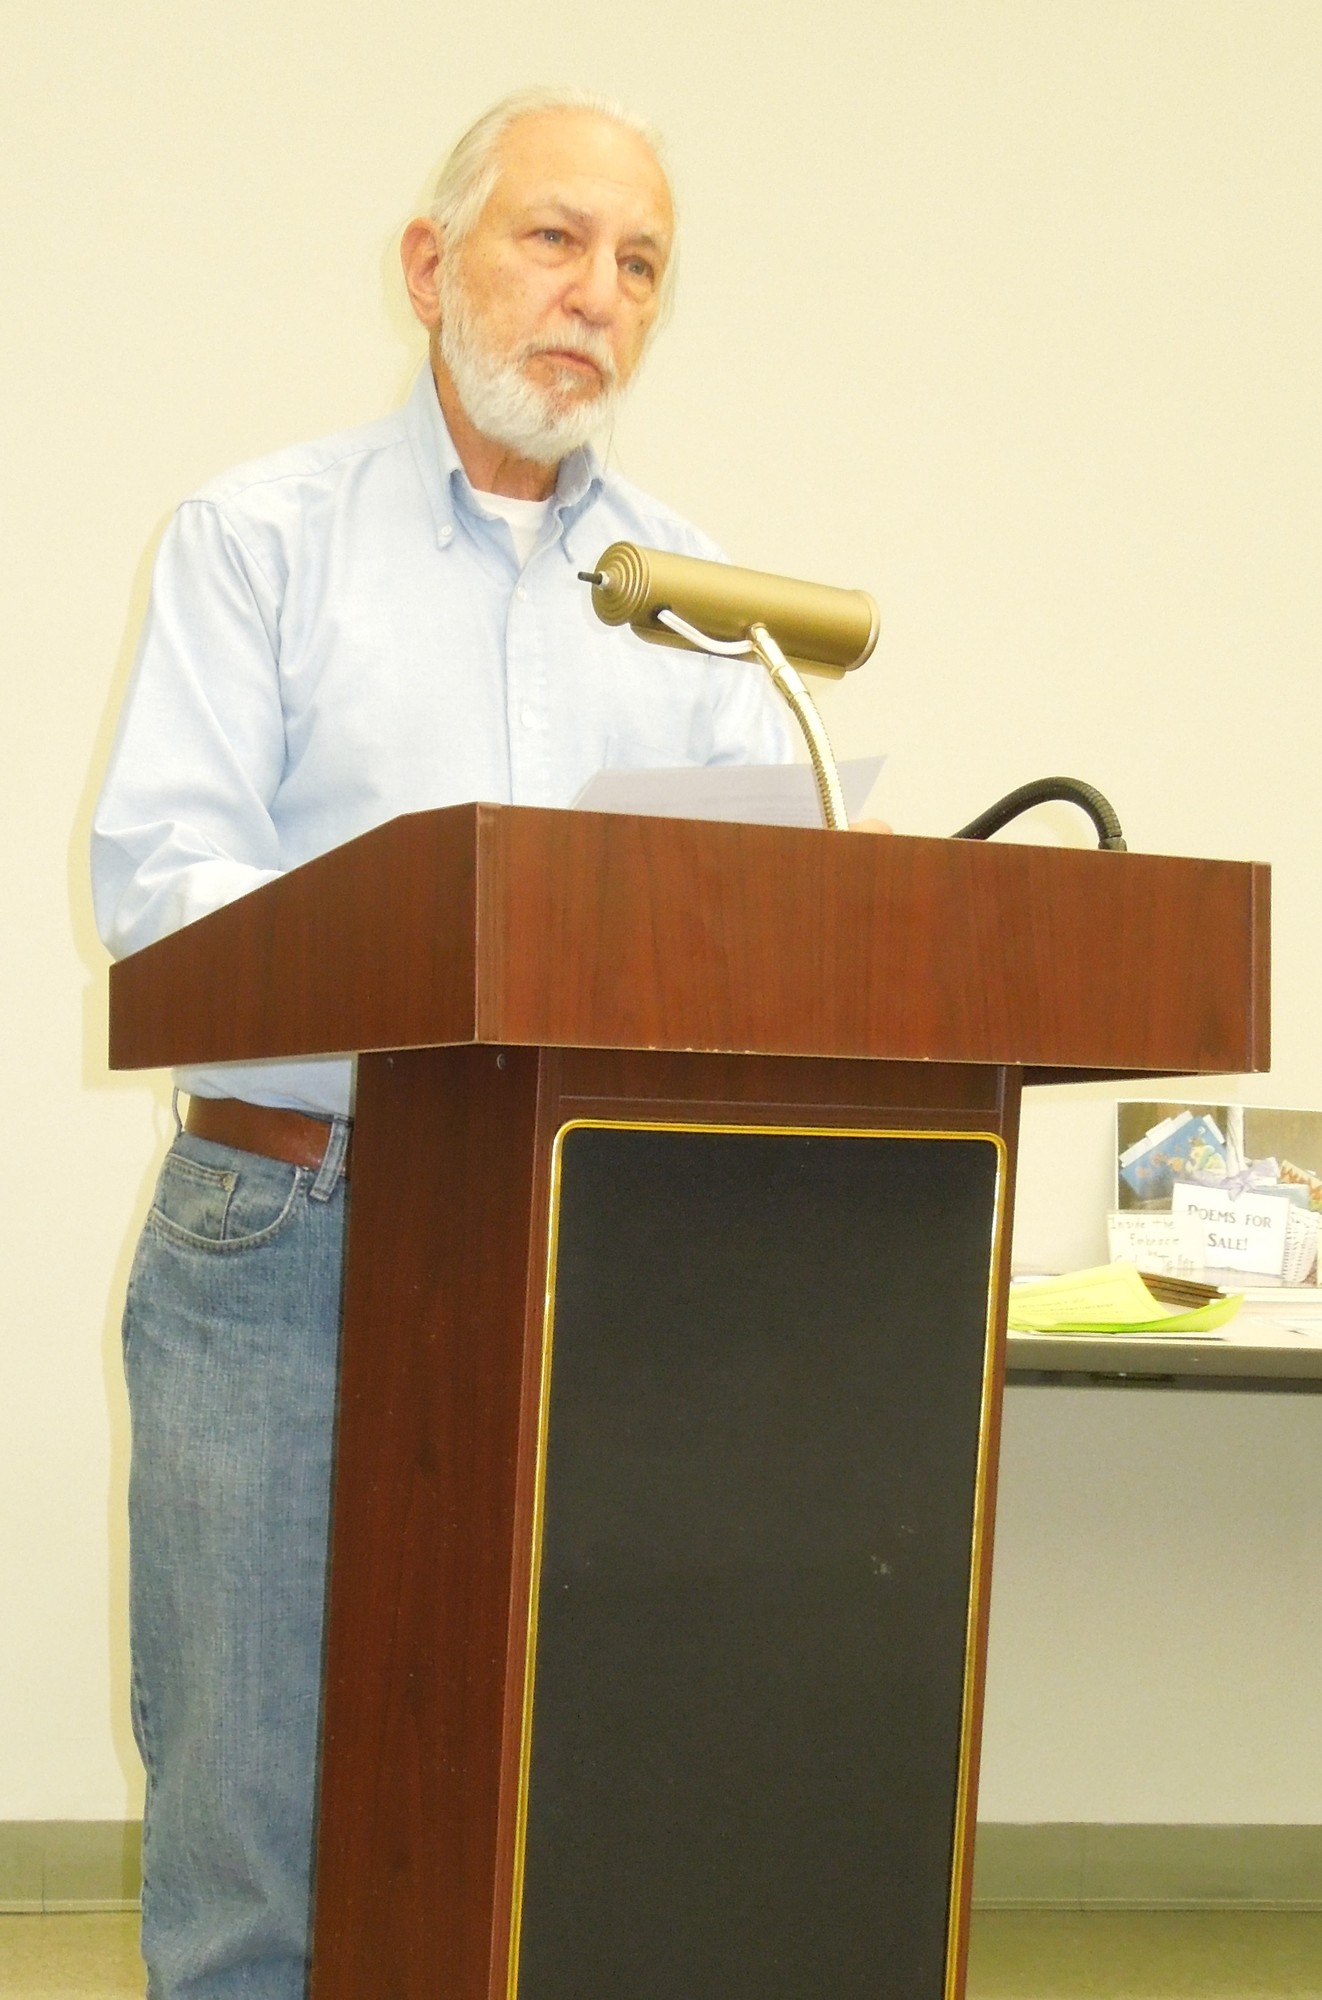 Arnold Hollander of Wantagh reads one of his poems during the open mic session at Wantagh Library on April 30.